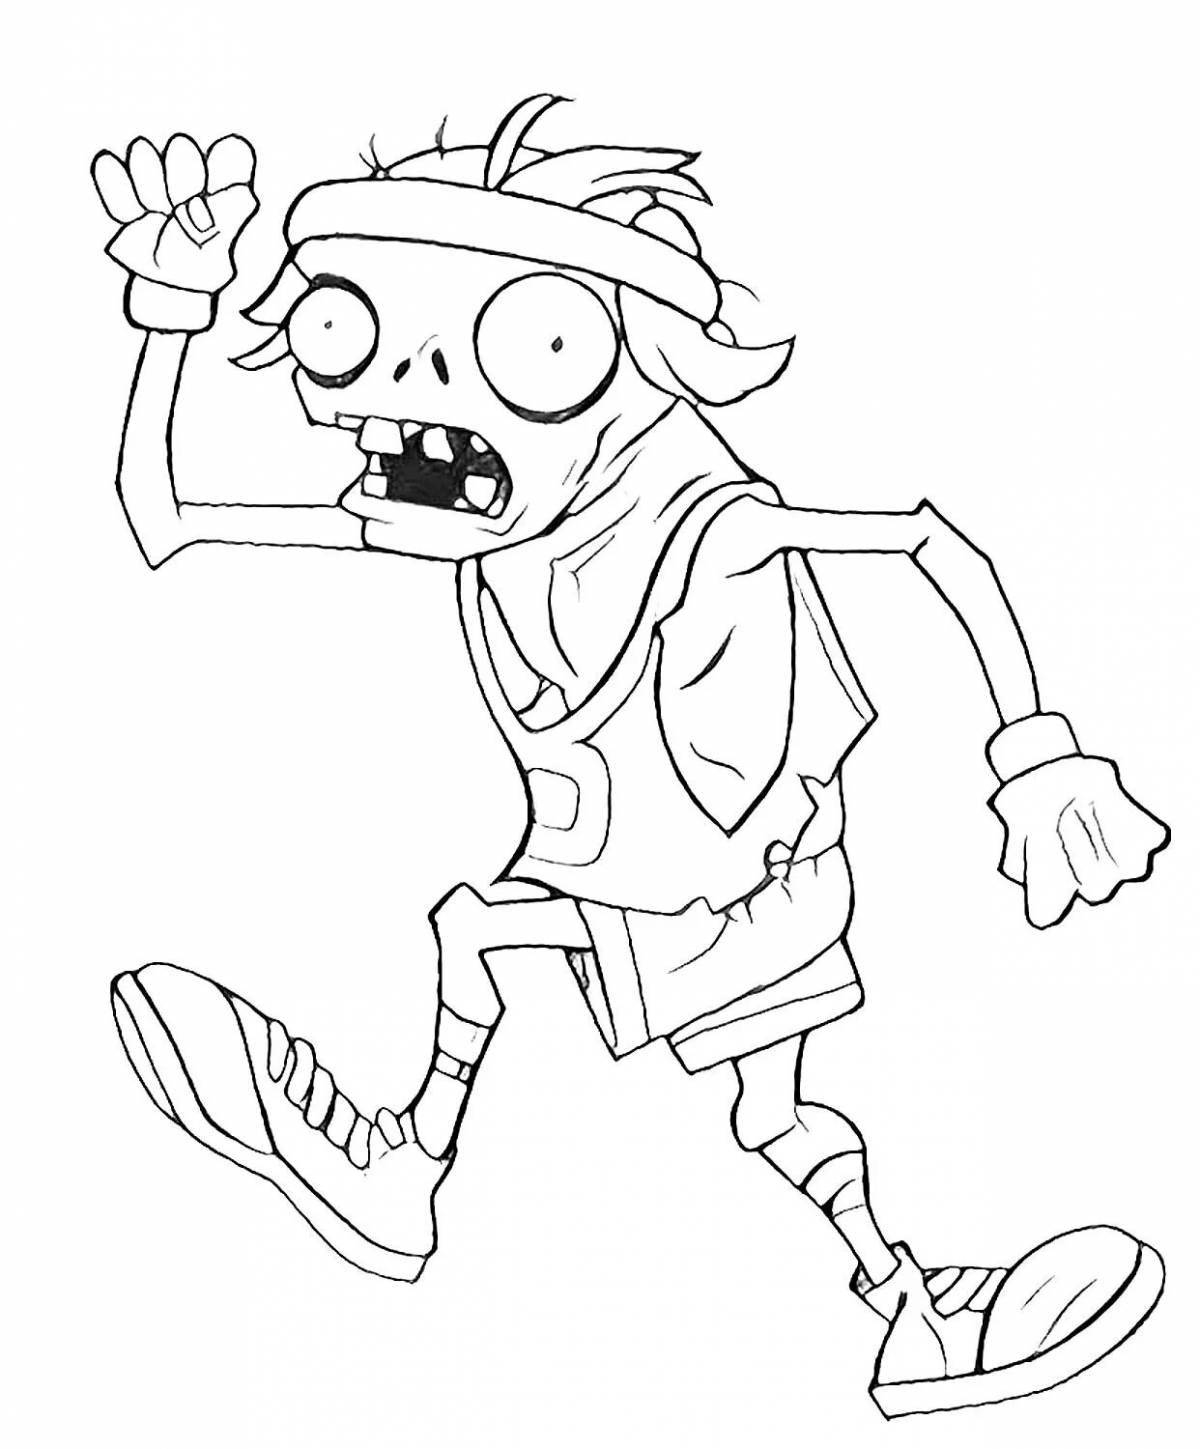 Scary zombie coloring pages for kids